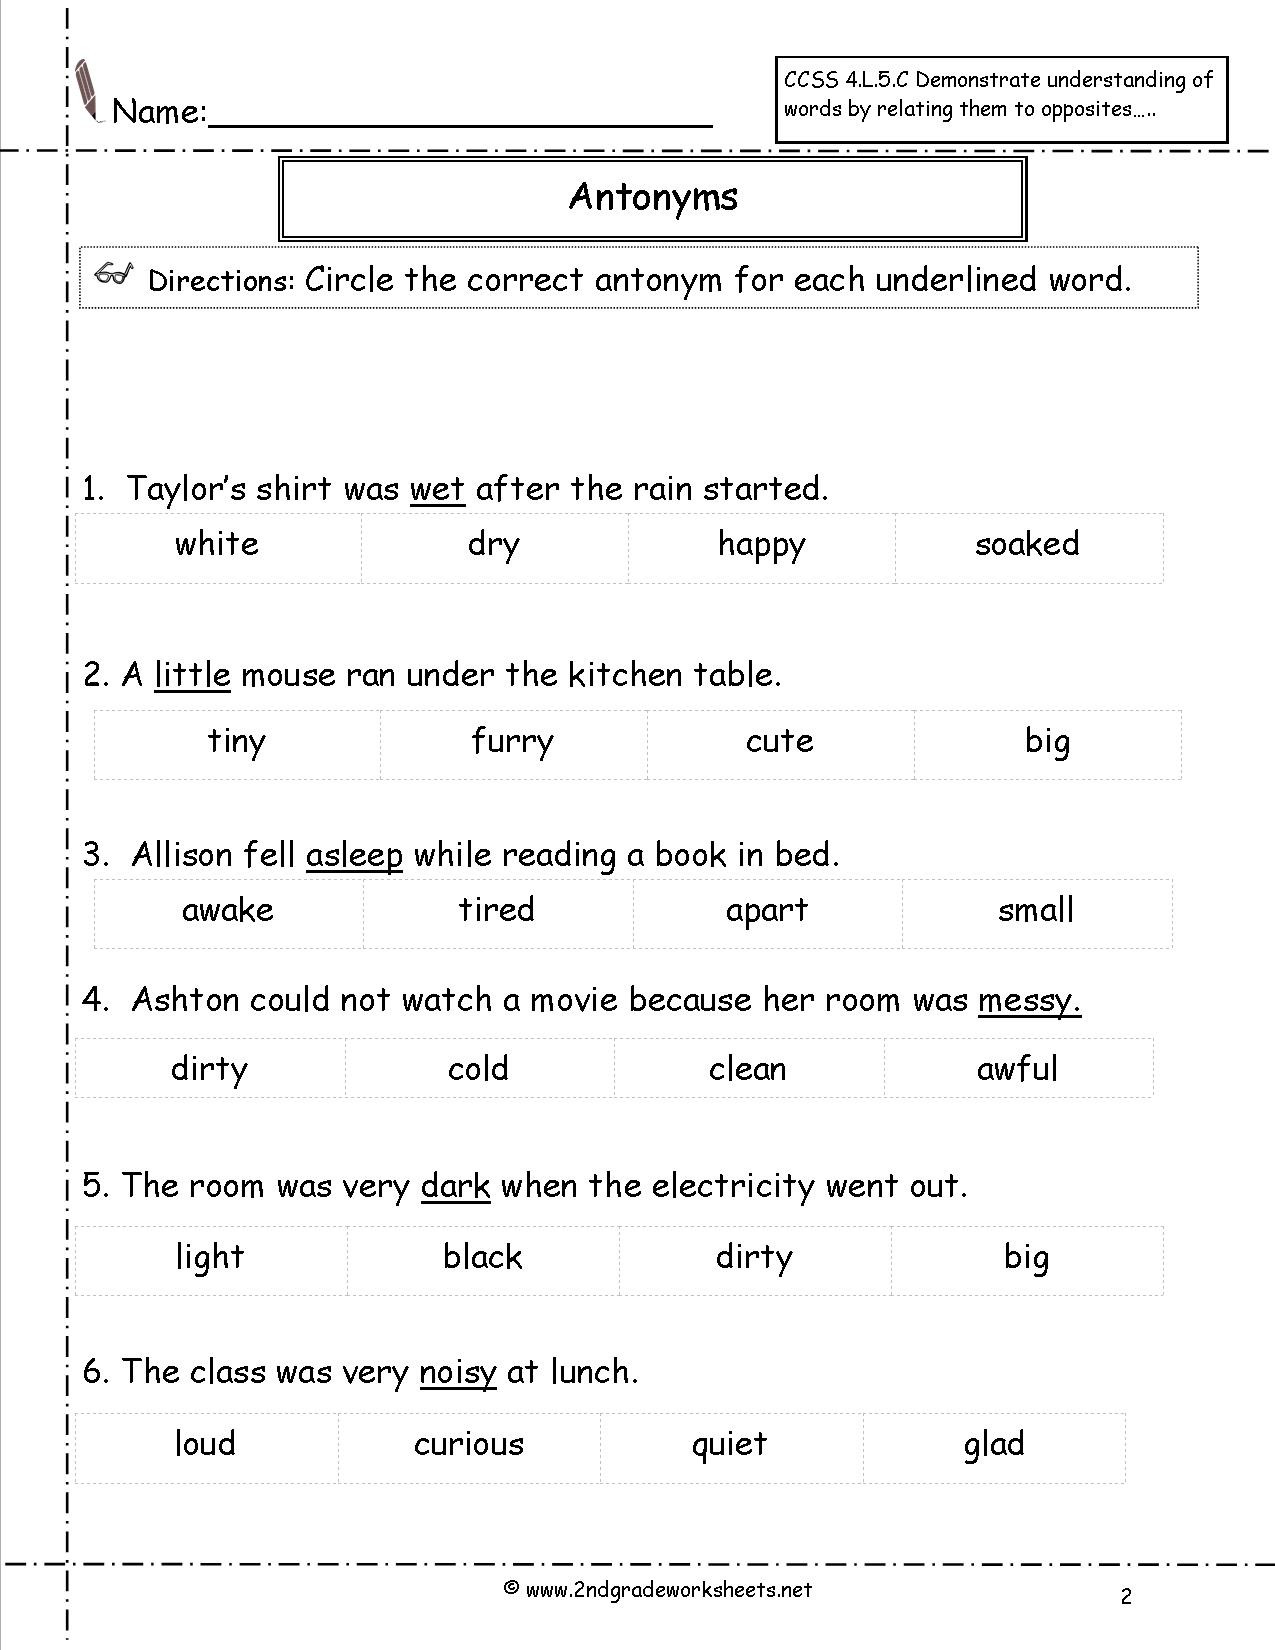 Antonyms Worksheets 3rd Grade Synonyms and Antonyms Worksheets